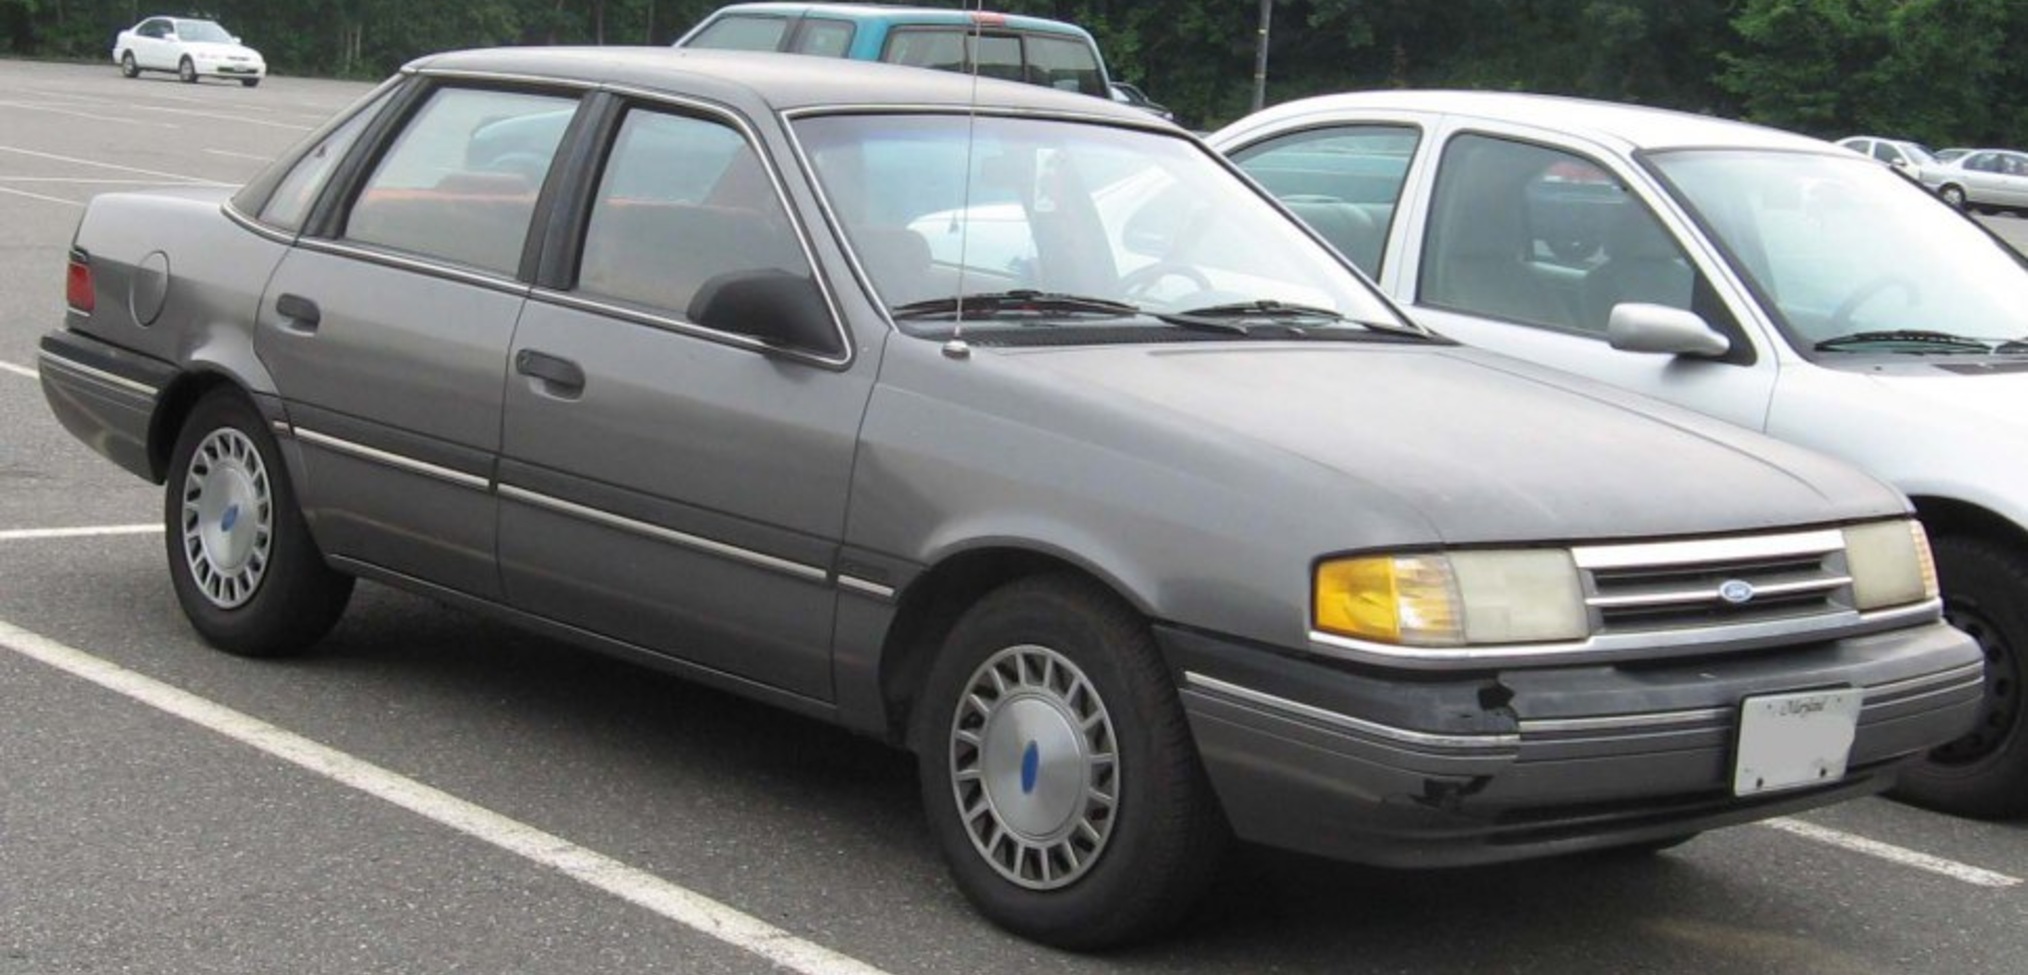 Ford Tempo 2.3 (99 Hp) 1987, 1988, 1989, 1990, 1991, 1992, 1993, 1994, 1995